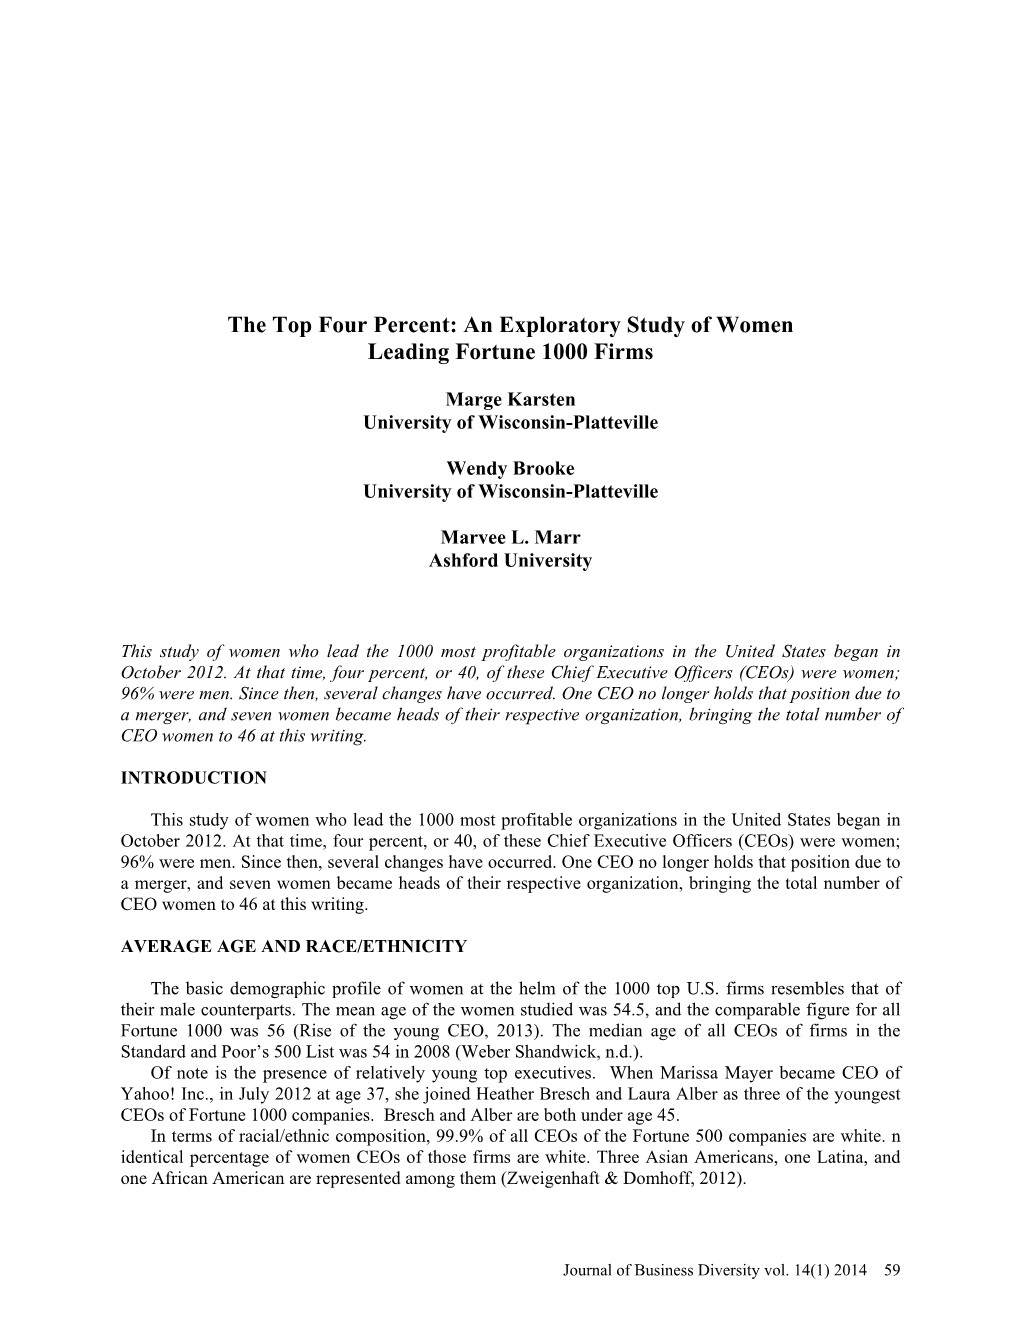 The Top Four Percent: an Exploratory Study of Women Leading Fortune 1000 Firms